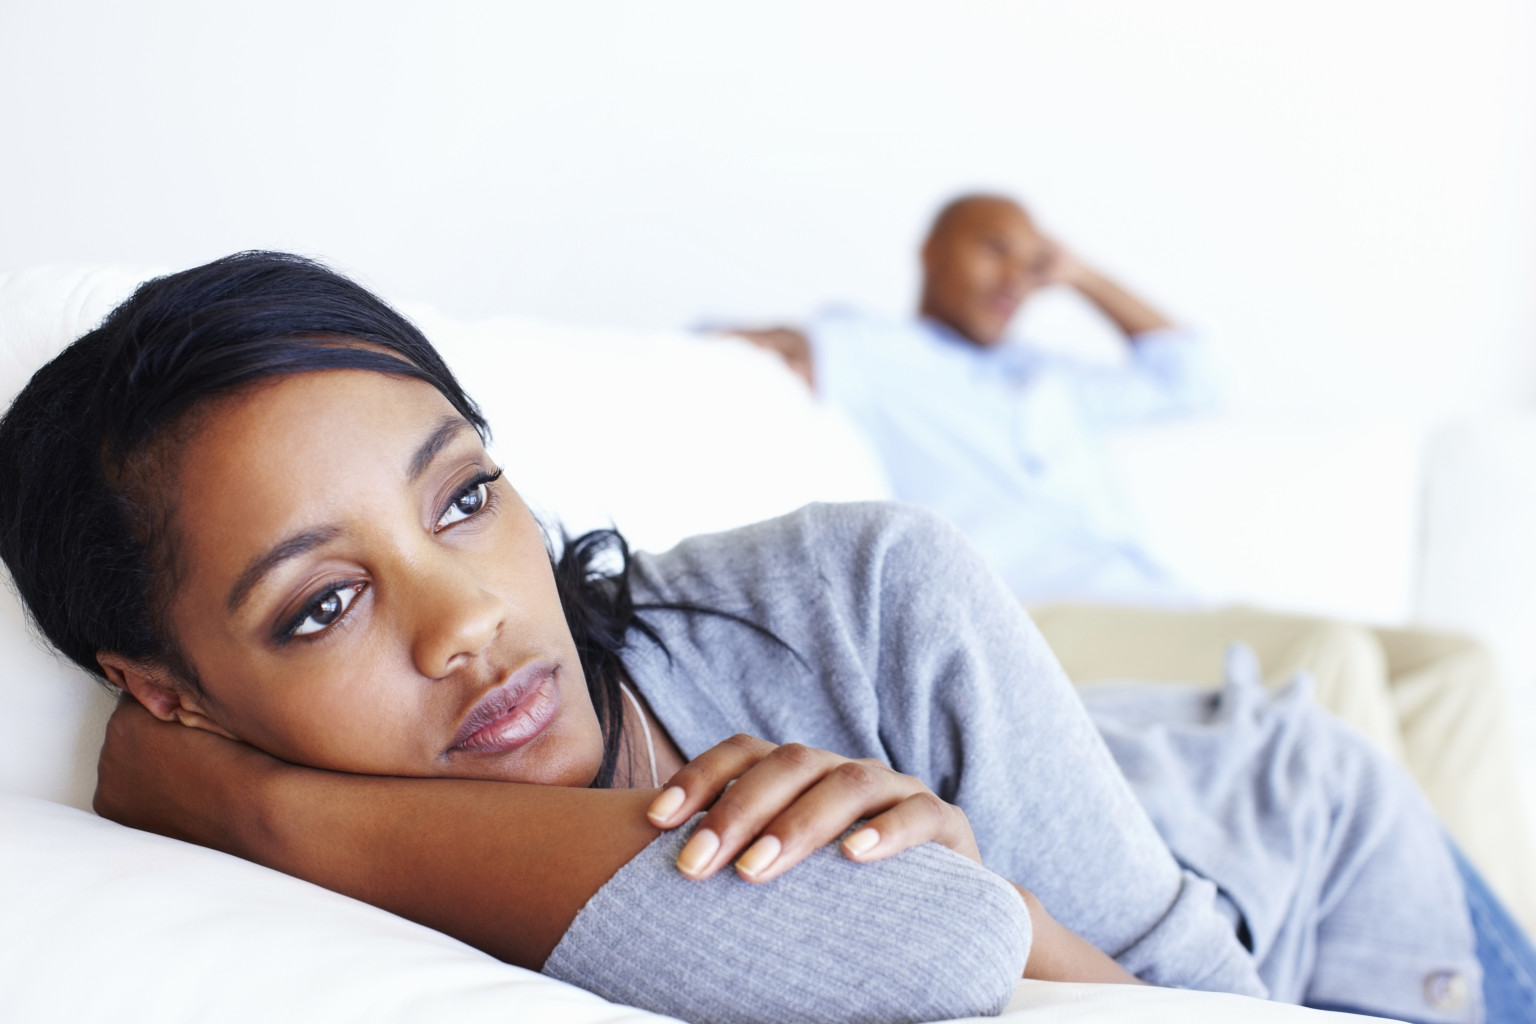 The Top 7 Causes of Infertility in Women